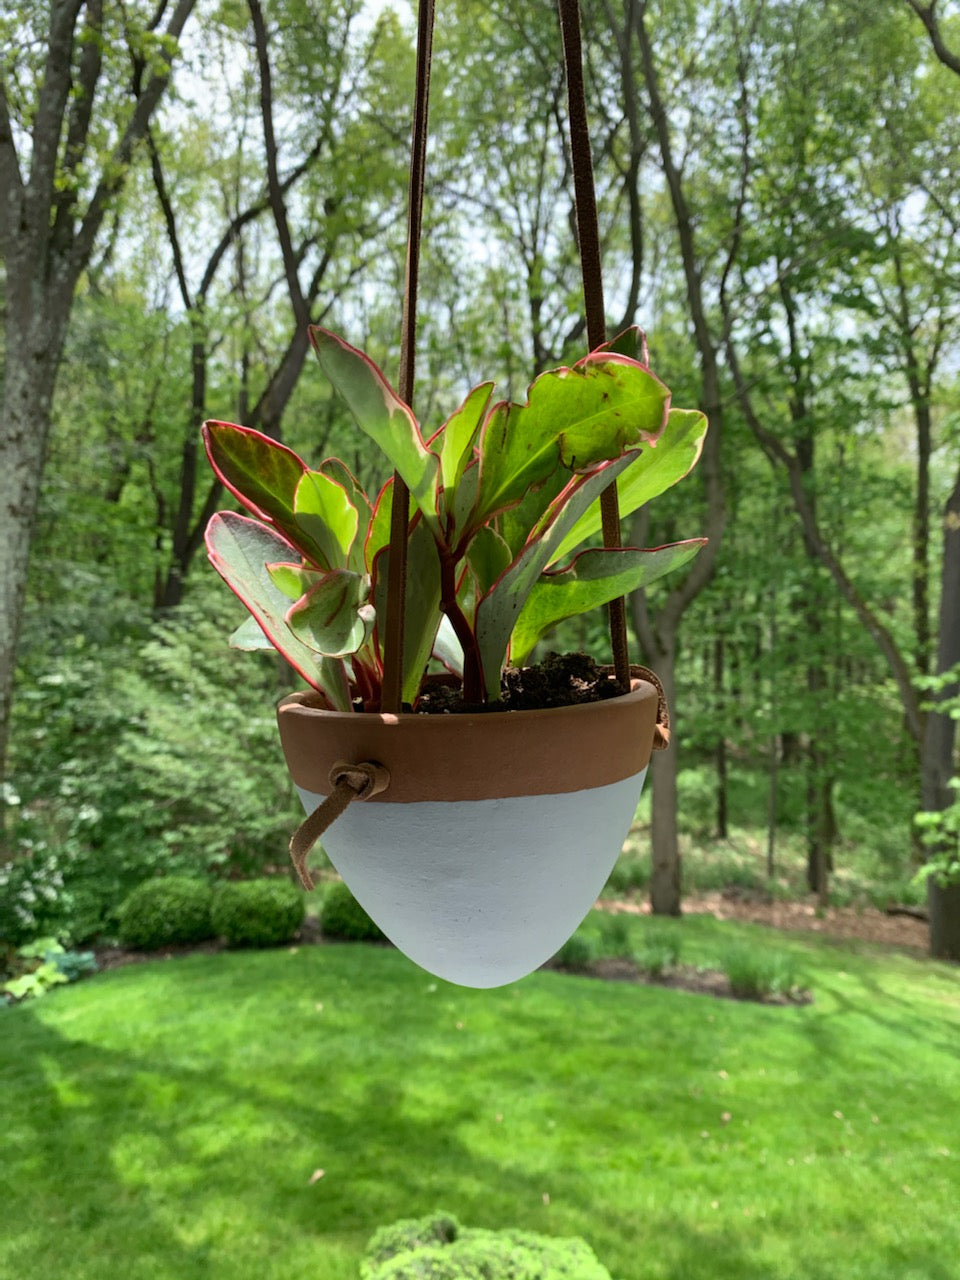 Small Hanging Planter with Leather Hanger